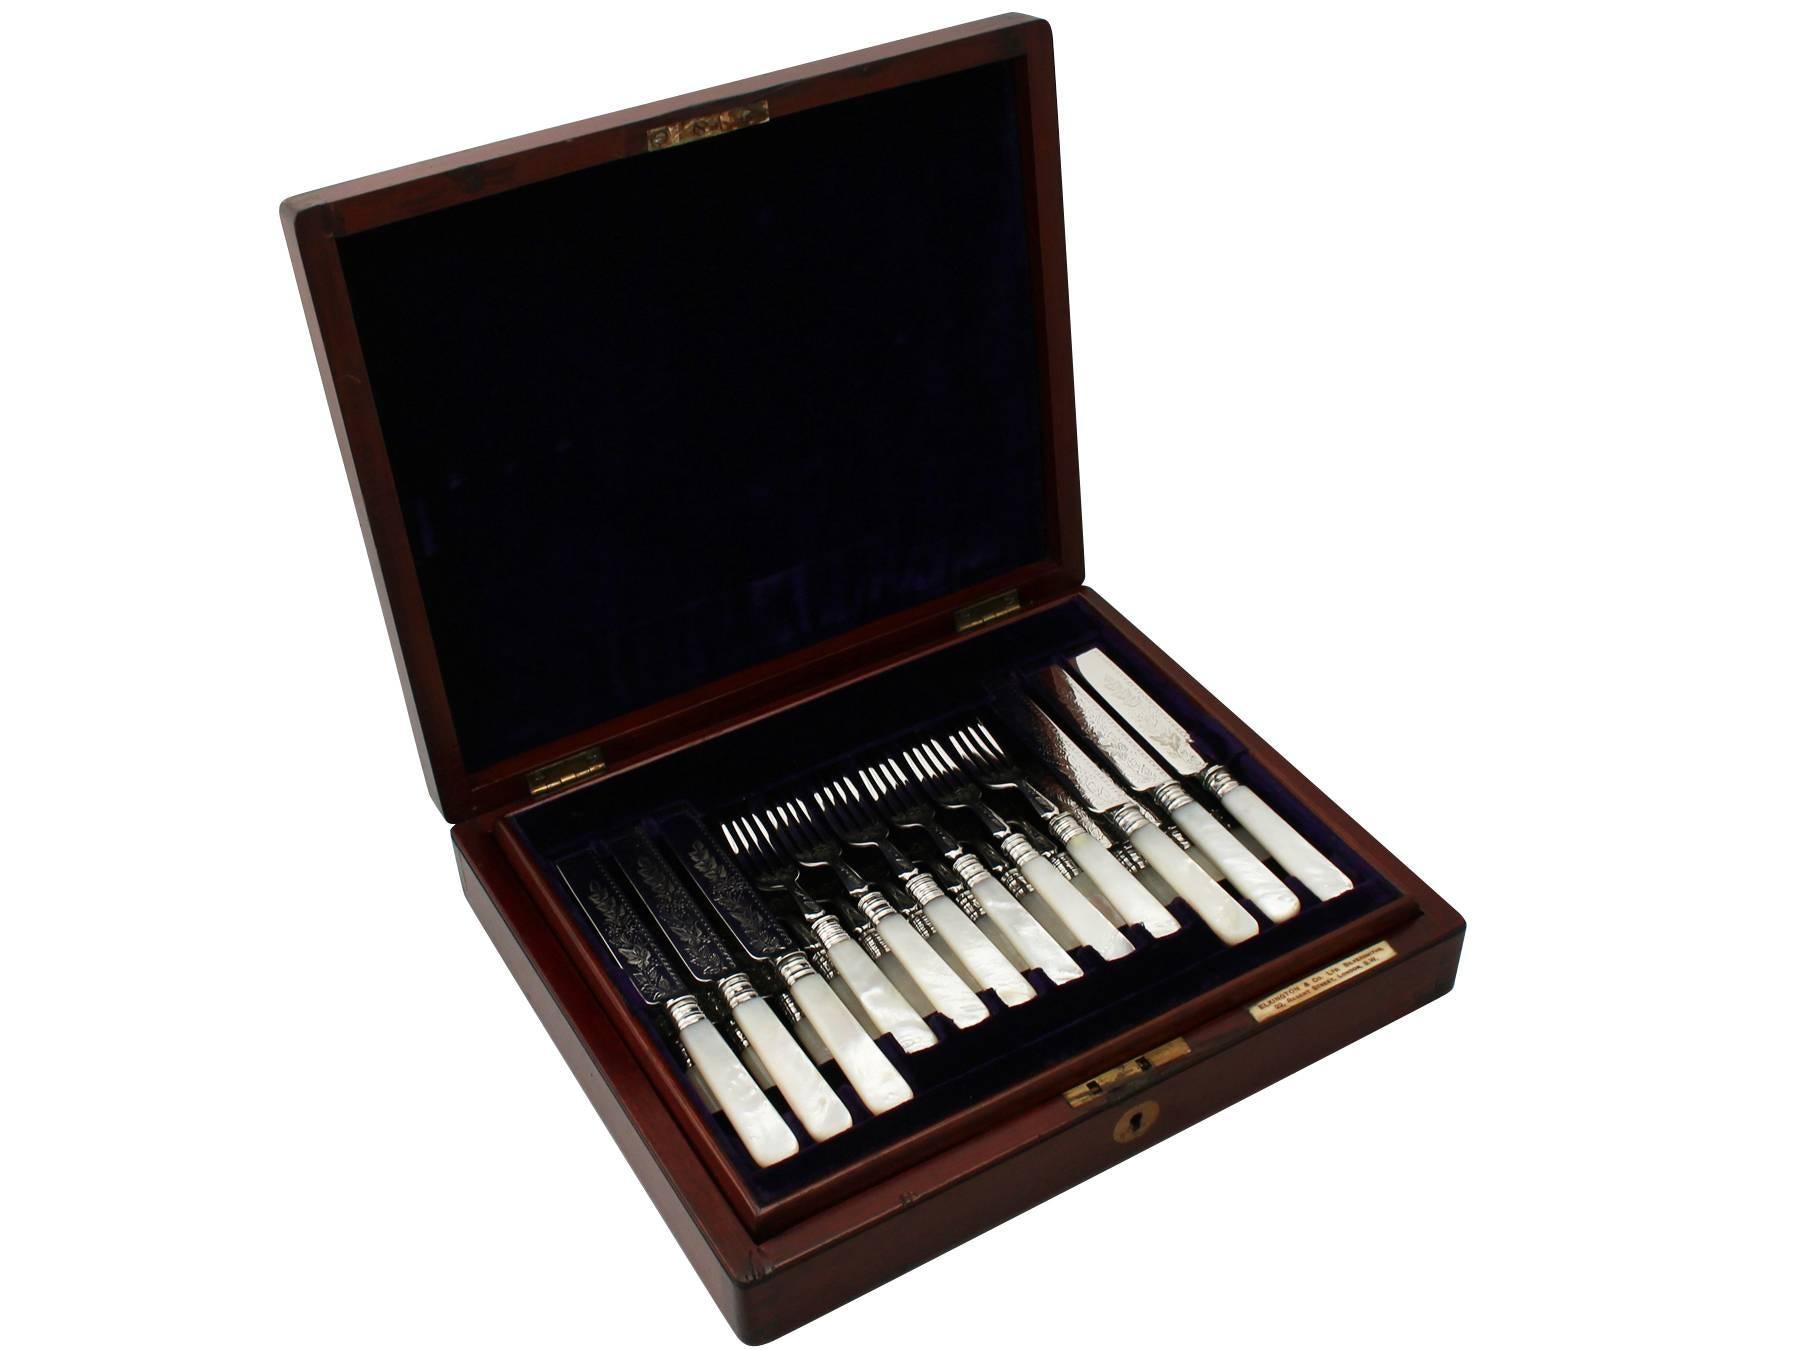 An exceptional, fine and impressive antique Edwardian English sterling silver and mother of pearl fruit/dessert cutlery set for 12 persons, boxed, an addition to our dining silverware collection.

This exceptional antique Edwardian sterling silver